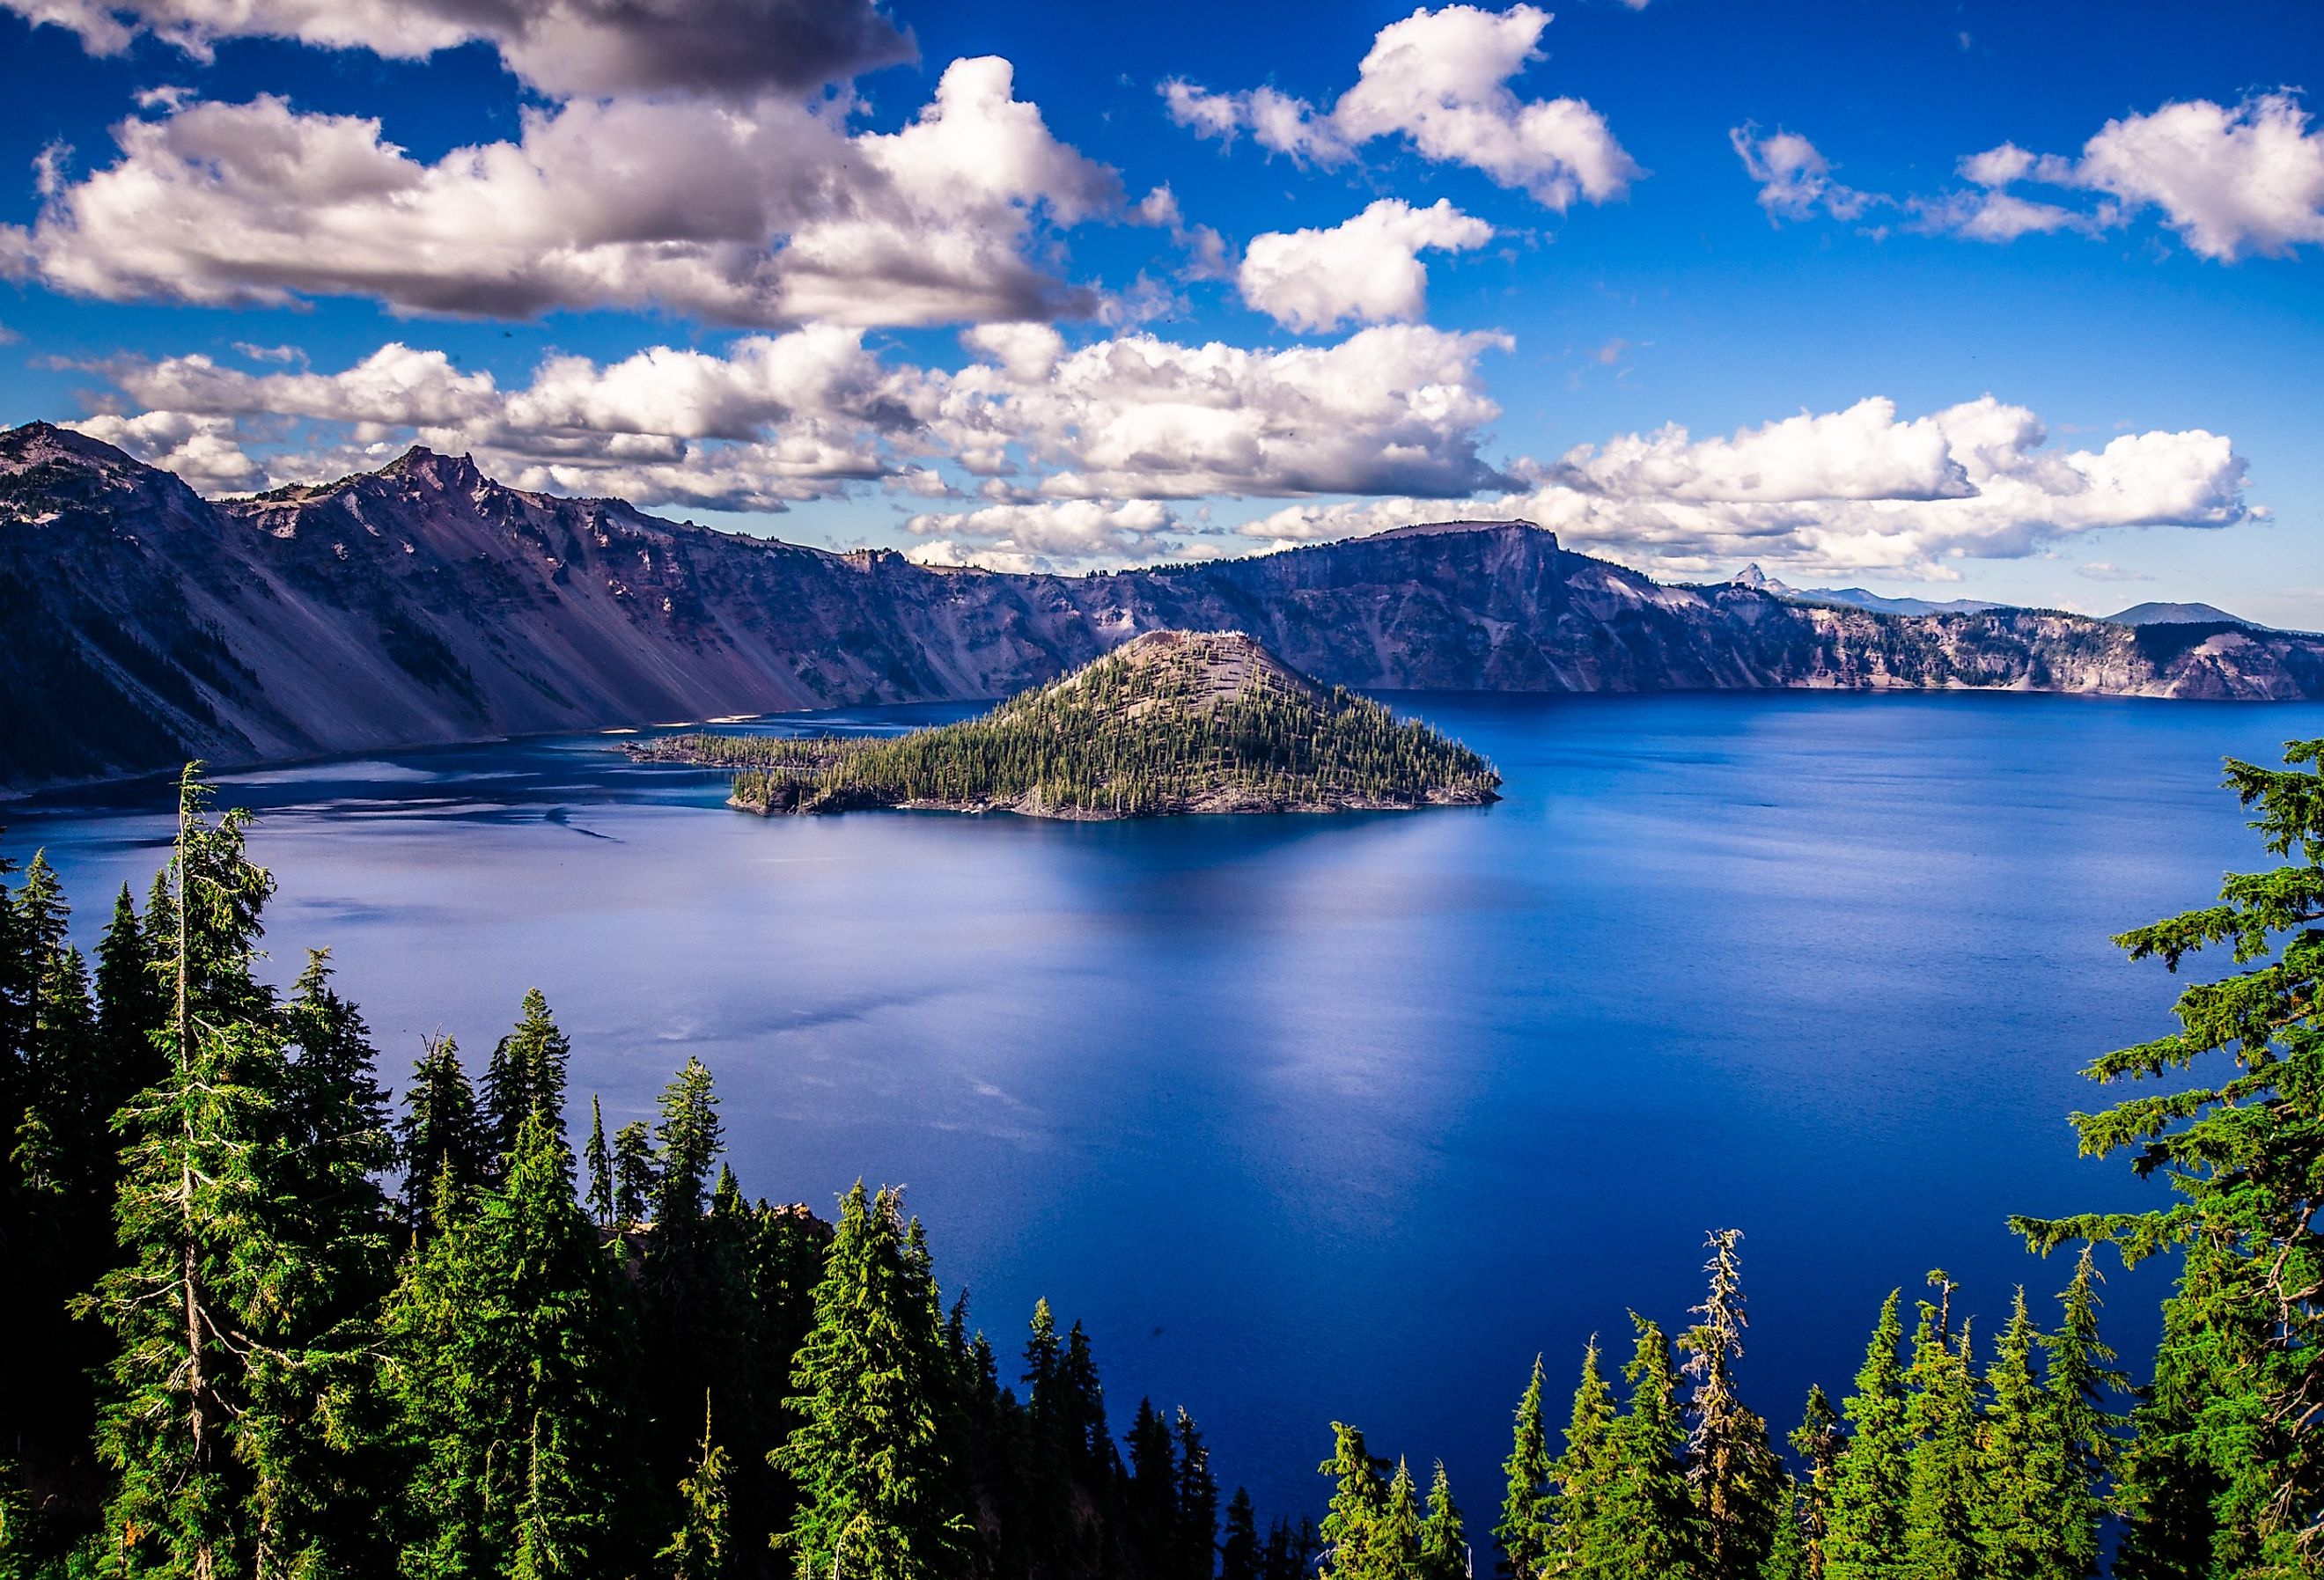 Overlooking the magnificent Crater Lake, Oregon.